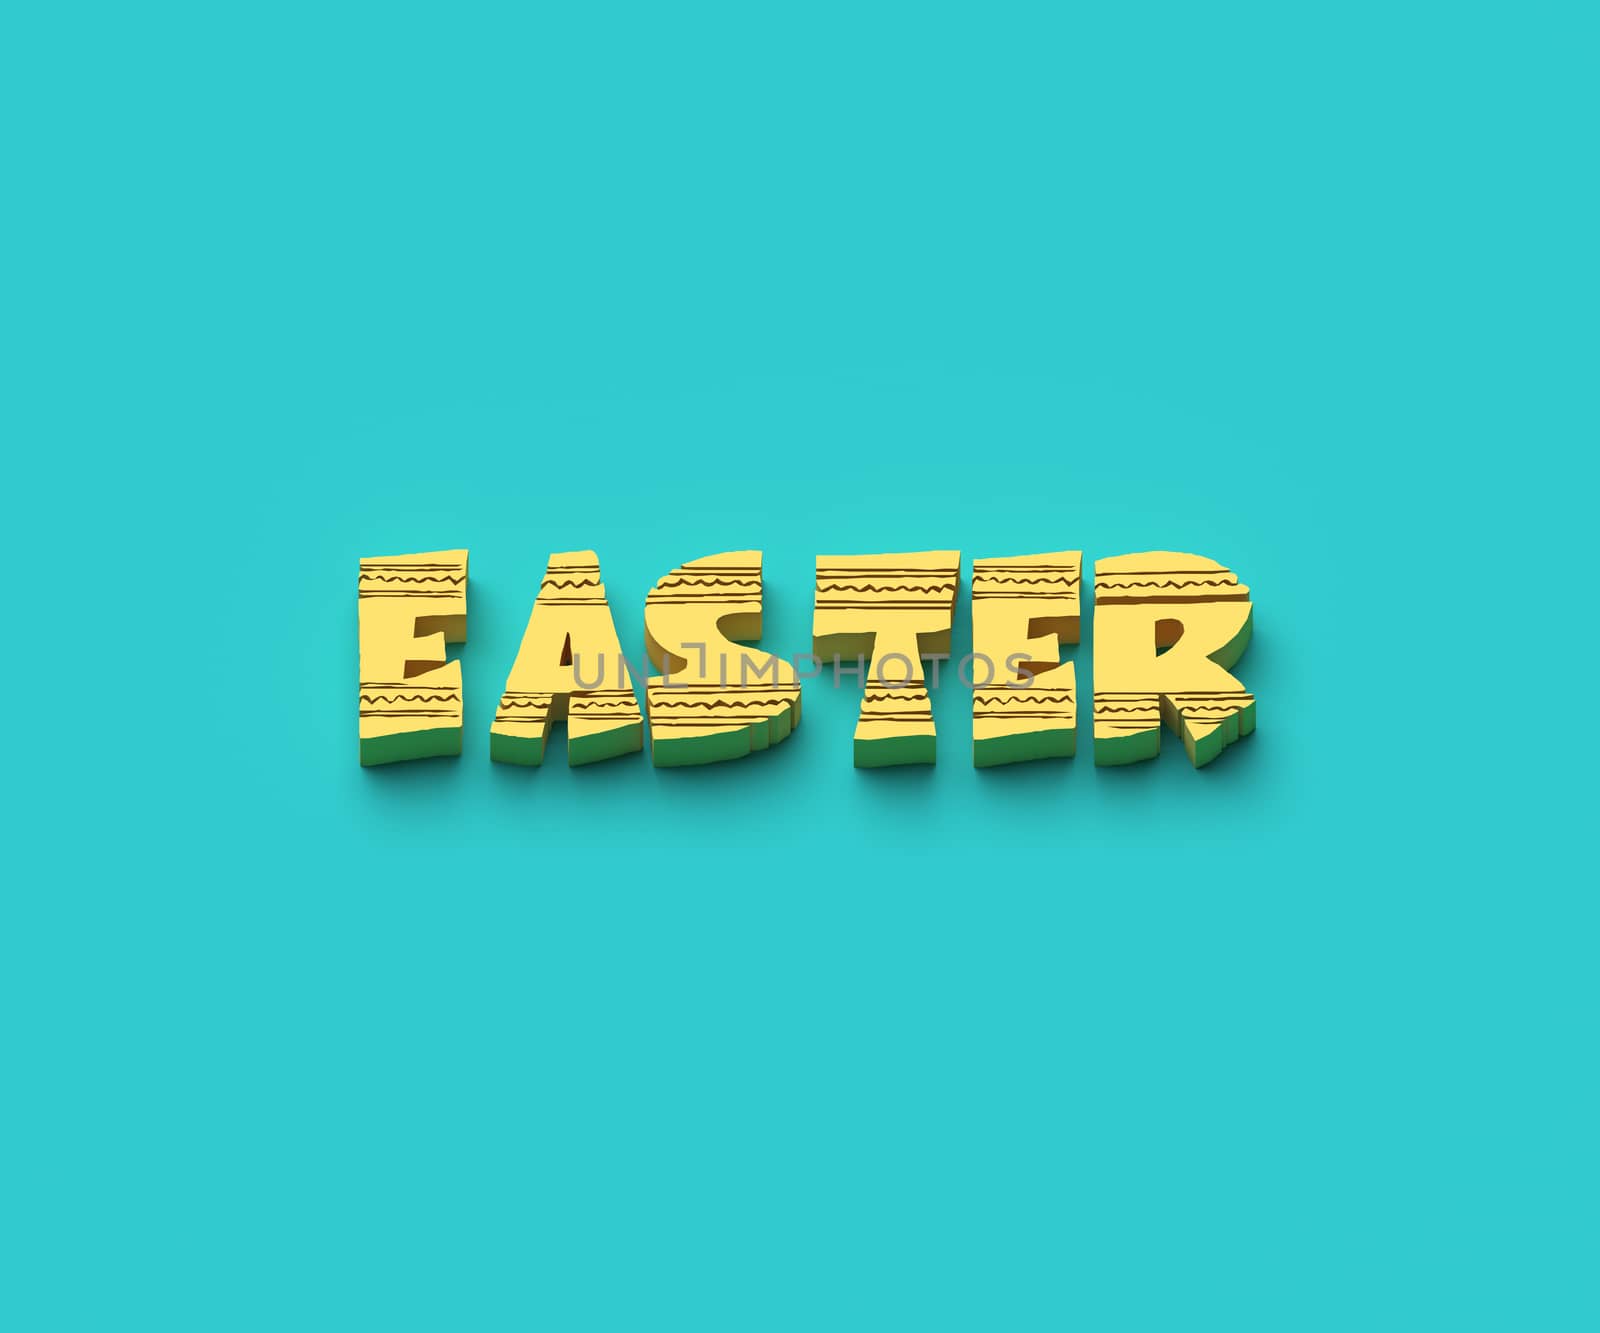 3D WORDS OF 'EASTER' by PrettyTG